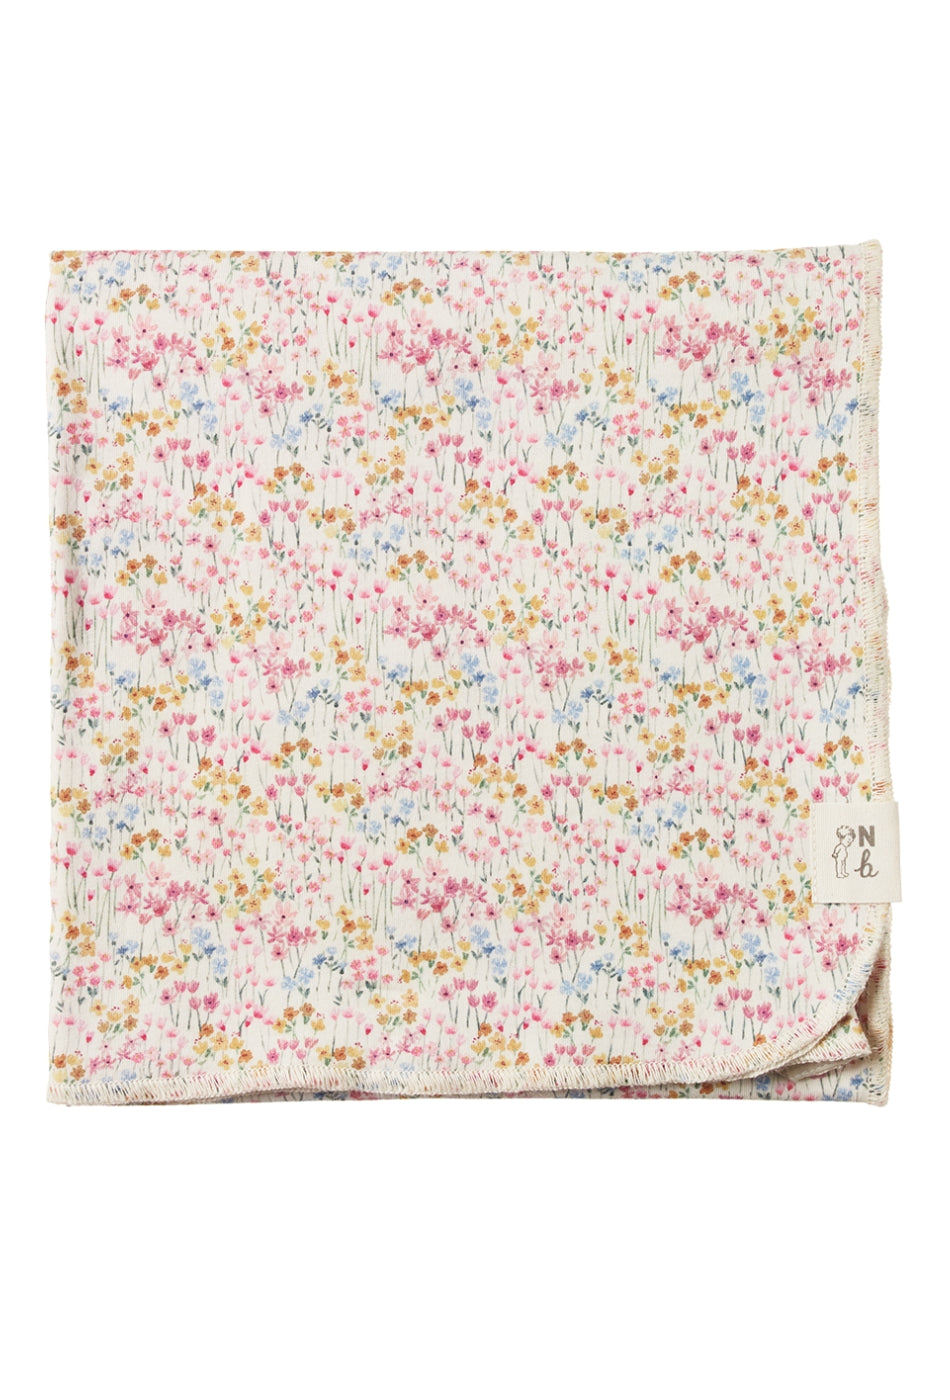 Wrap - Wildflower Mountain Print-NATURE BABY-P&K The General Store